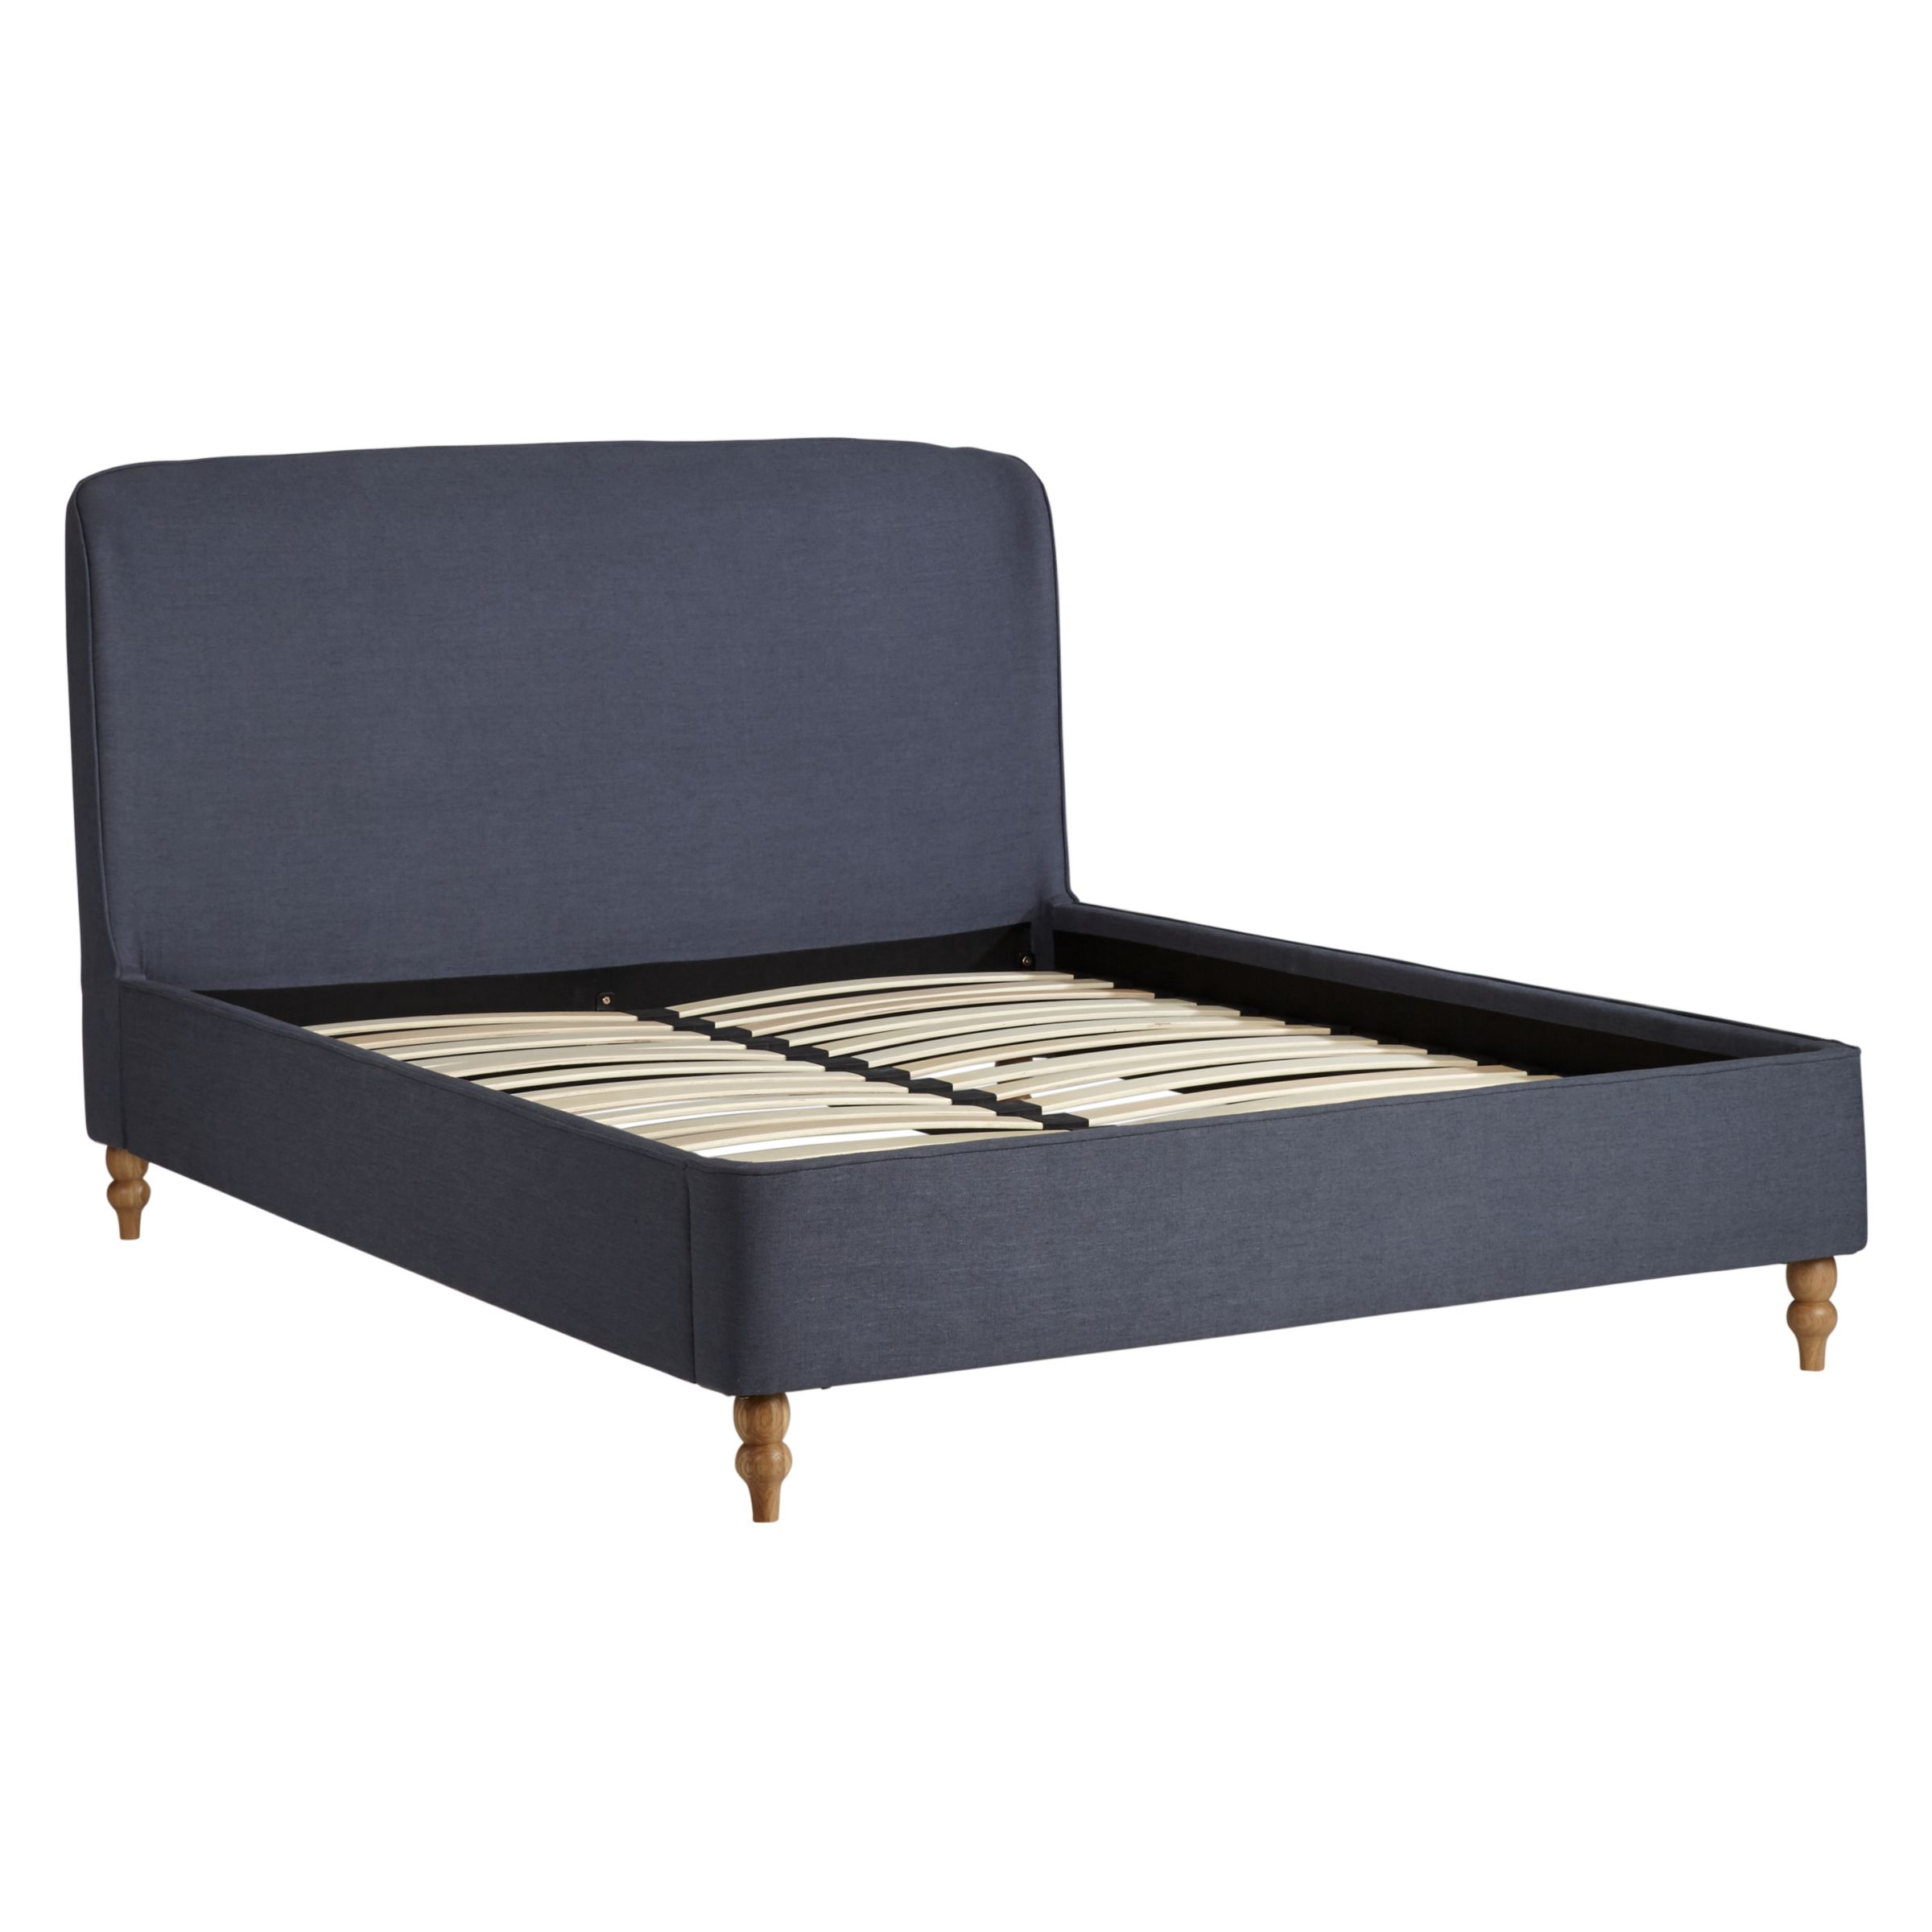 Croft Collection Skye Bed Frame, Double